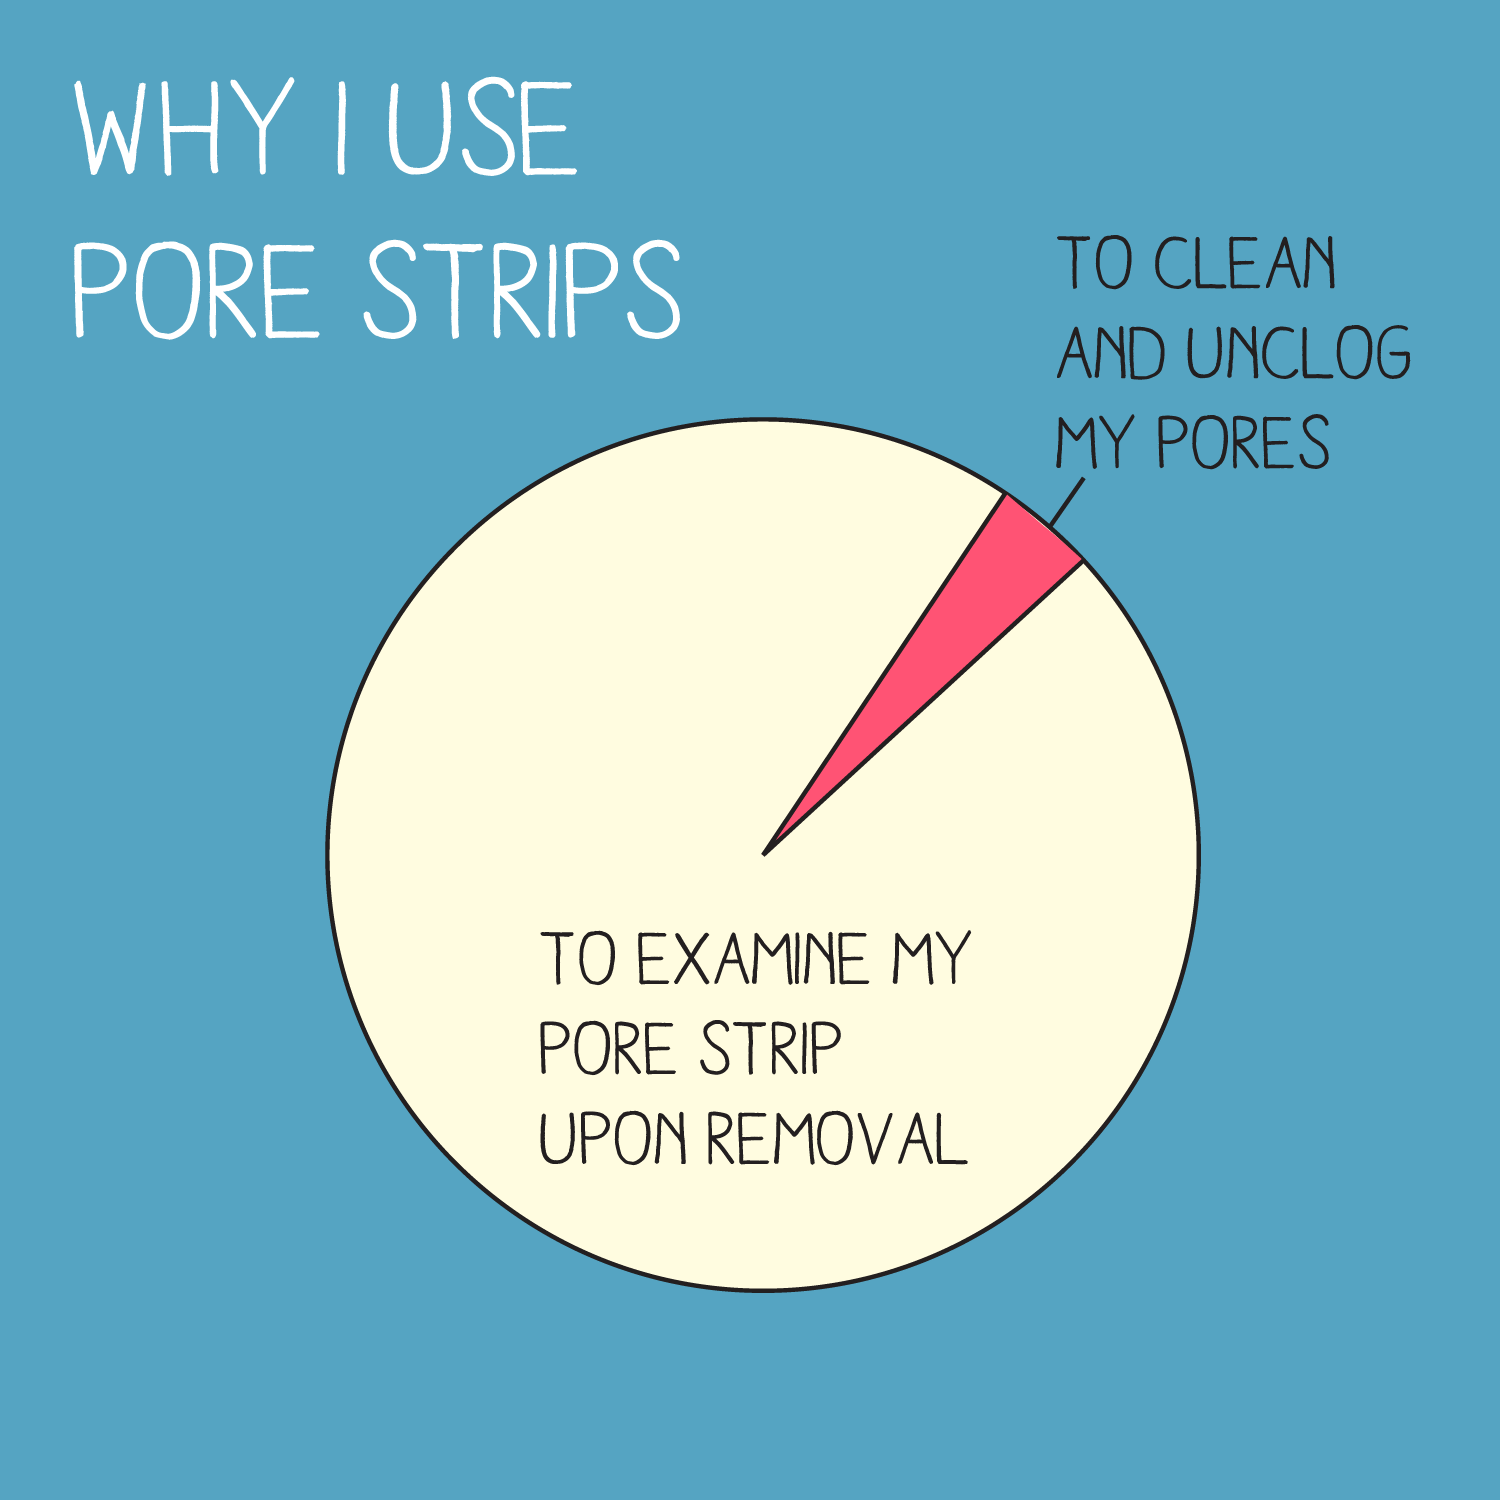 circle - Why Tuse Pore Strips To Clean And Unclog My Pores To Examine My Pore Strip Upon Removal